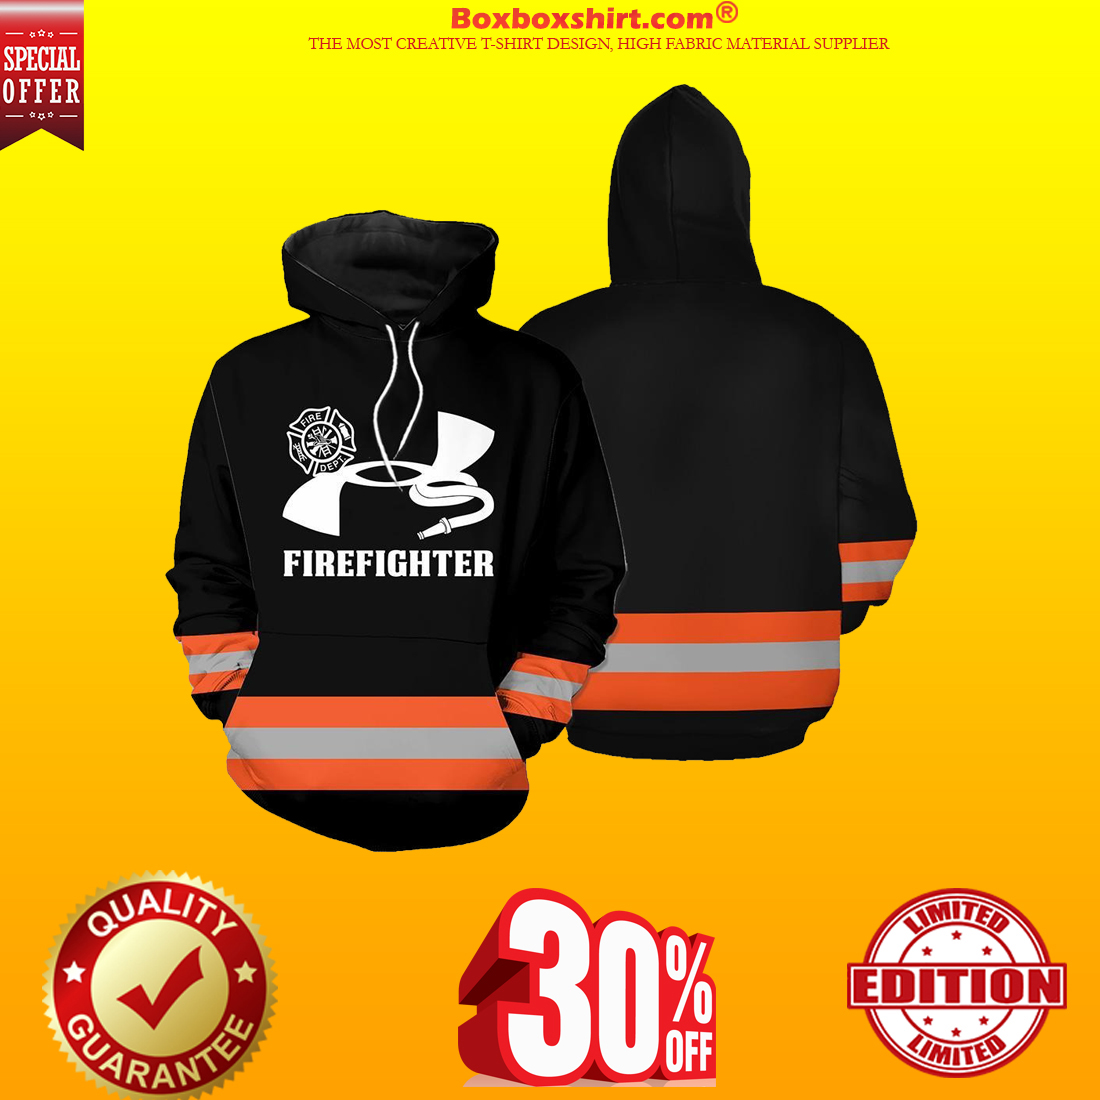 under armour firefighter hoodie